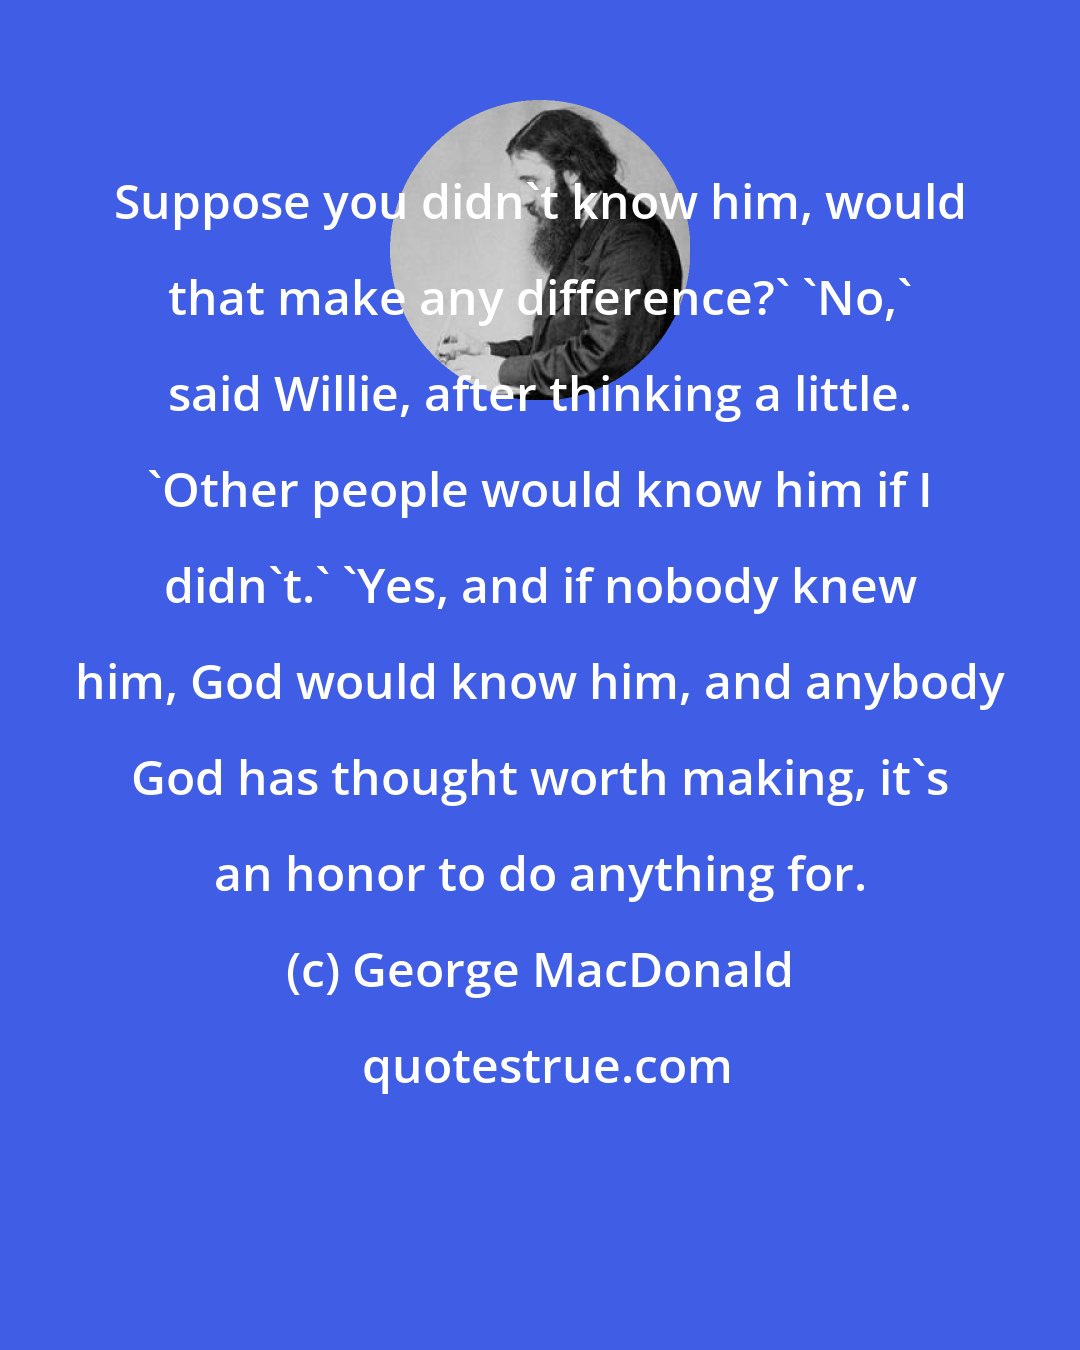 George MacDonald: Suppose you didn't know him, would that make any difference?' 'No,' said Willie, after thinking a little. 'Other people would know him if I didn't.' 'Yes, and if nobody knew him, God would know him, and anybody God has thought worth making, it's an honor to do anything for.